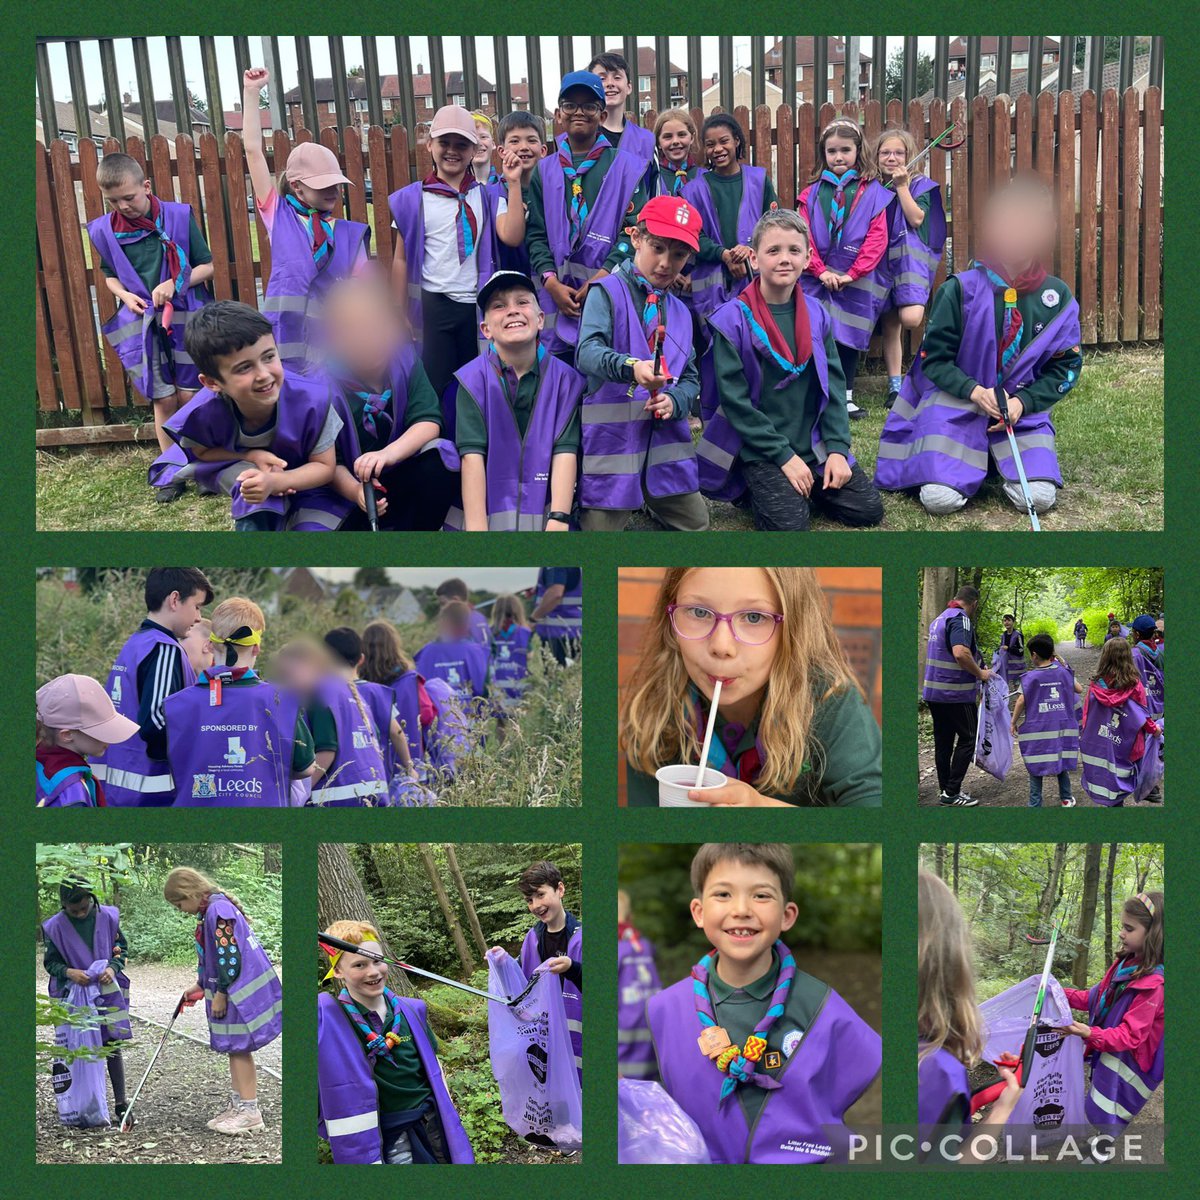 Yesterday as part of #30dayswild, both sections completed a #litterpick around @ManorfieldHall 
We filled bags with cans, glass bottles, cigarette butts & a few random car parts! #skillsforlife #beavers #cubs #scouting 

@BITMO_LS10 @loveleedsparks @YorksWildlife @LitterFreeLeeds